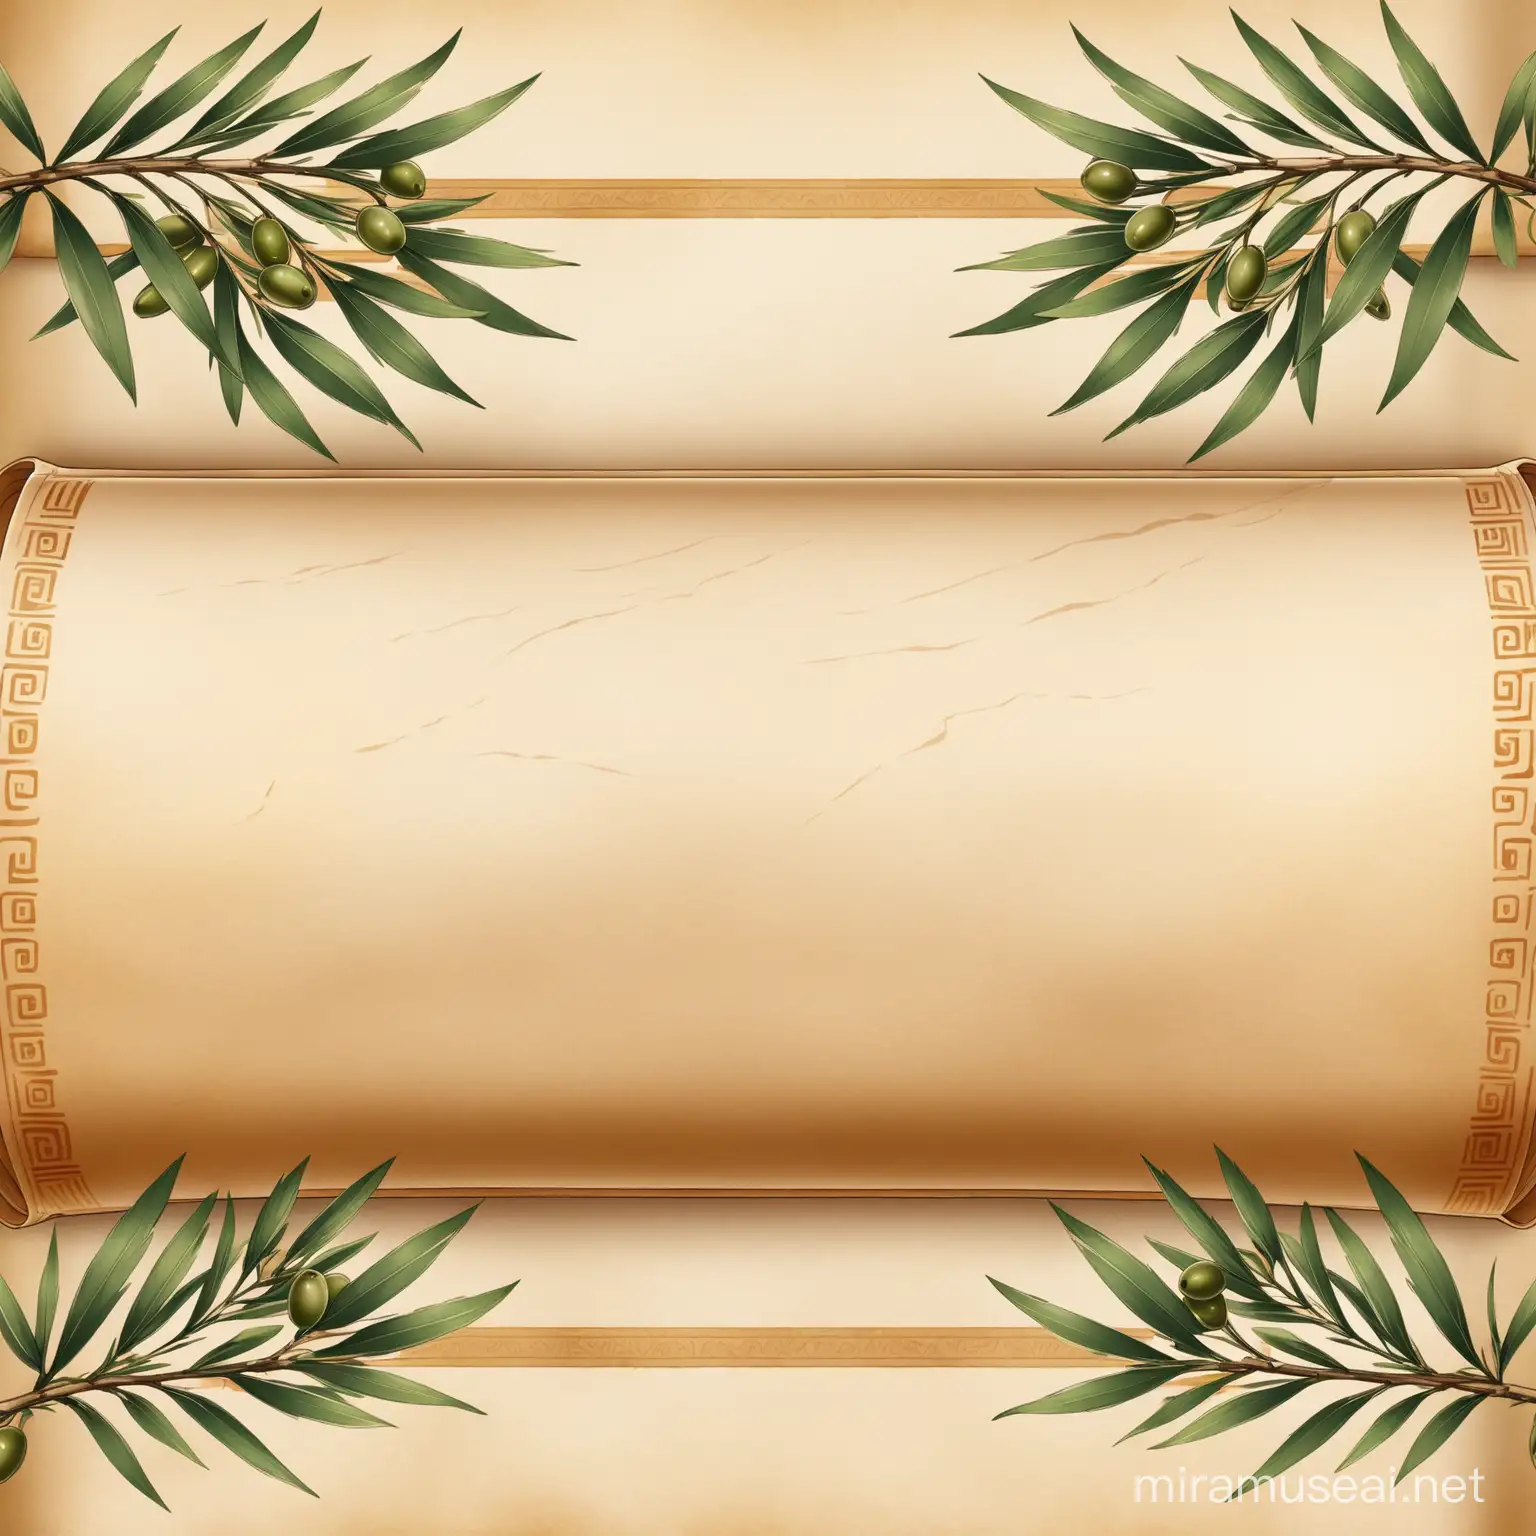 ancient Greek scroll, adorned with olive branches, columns at the sides.